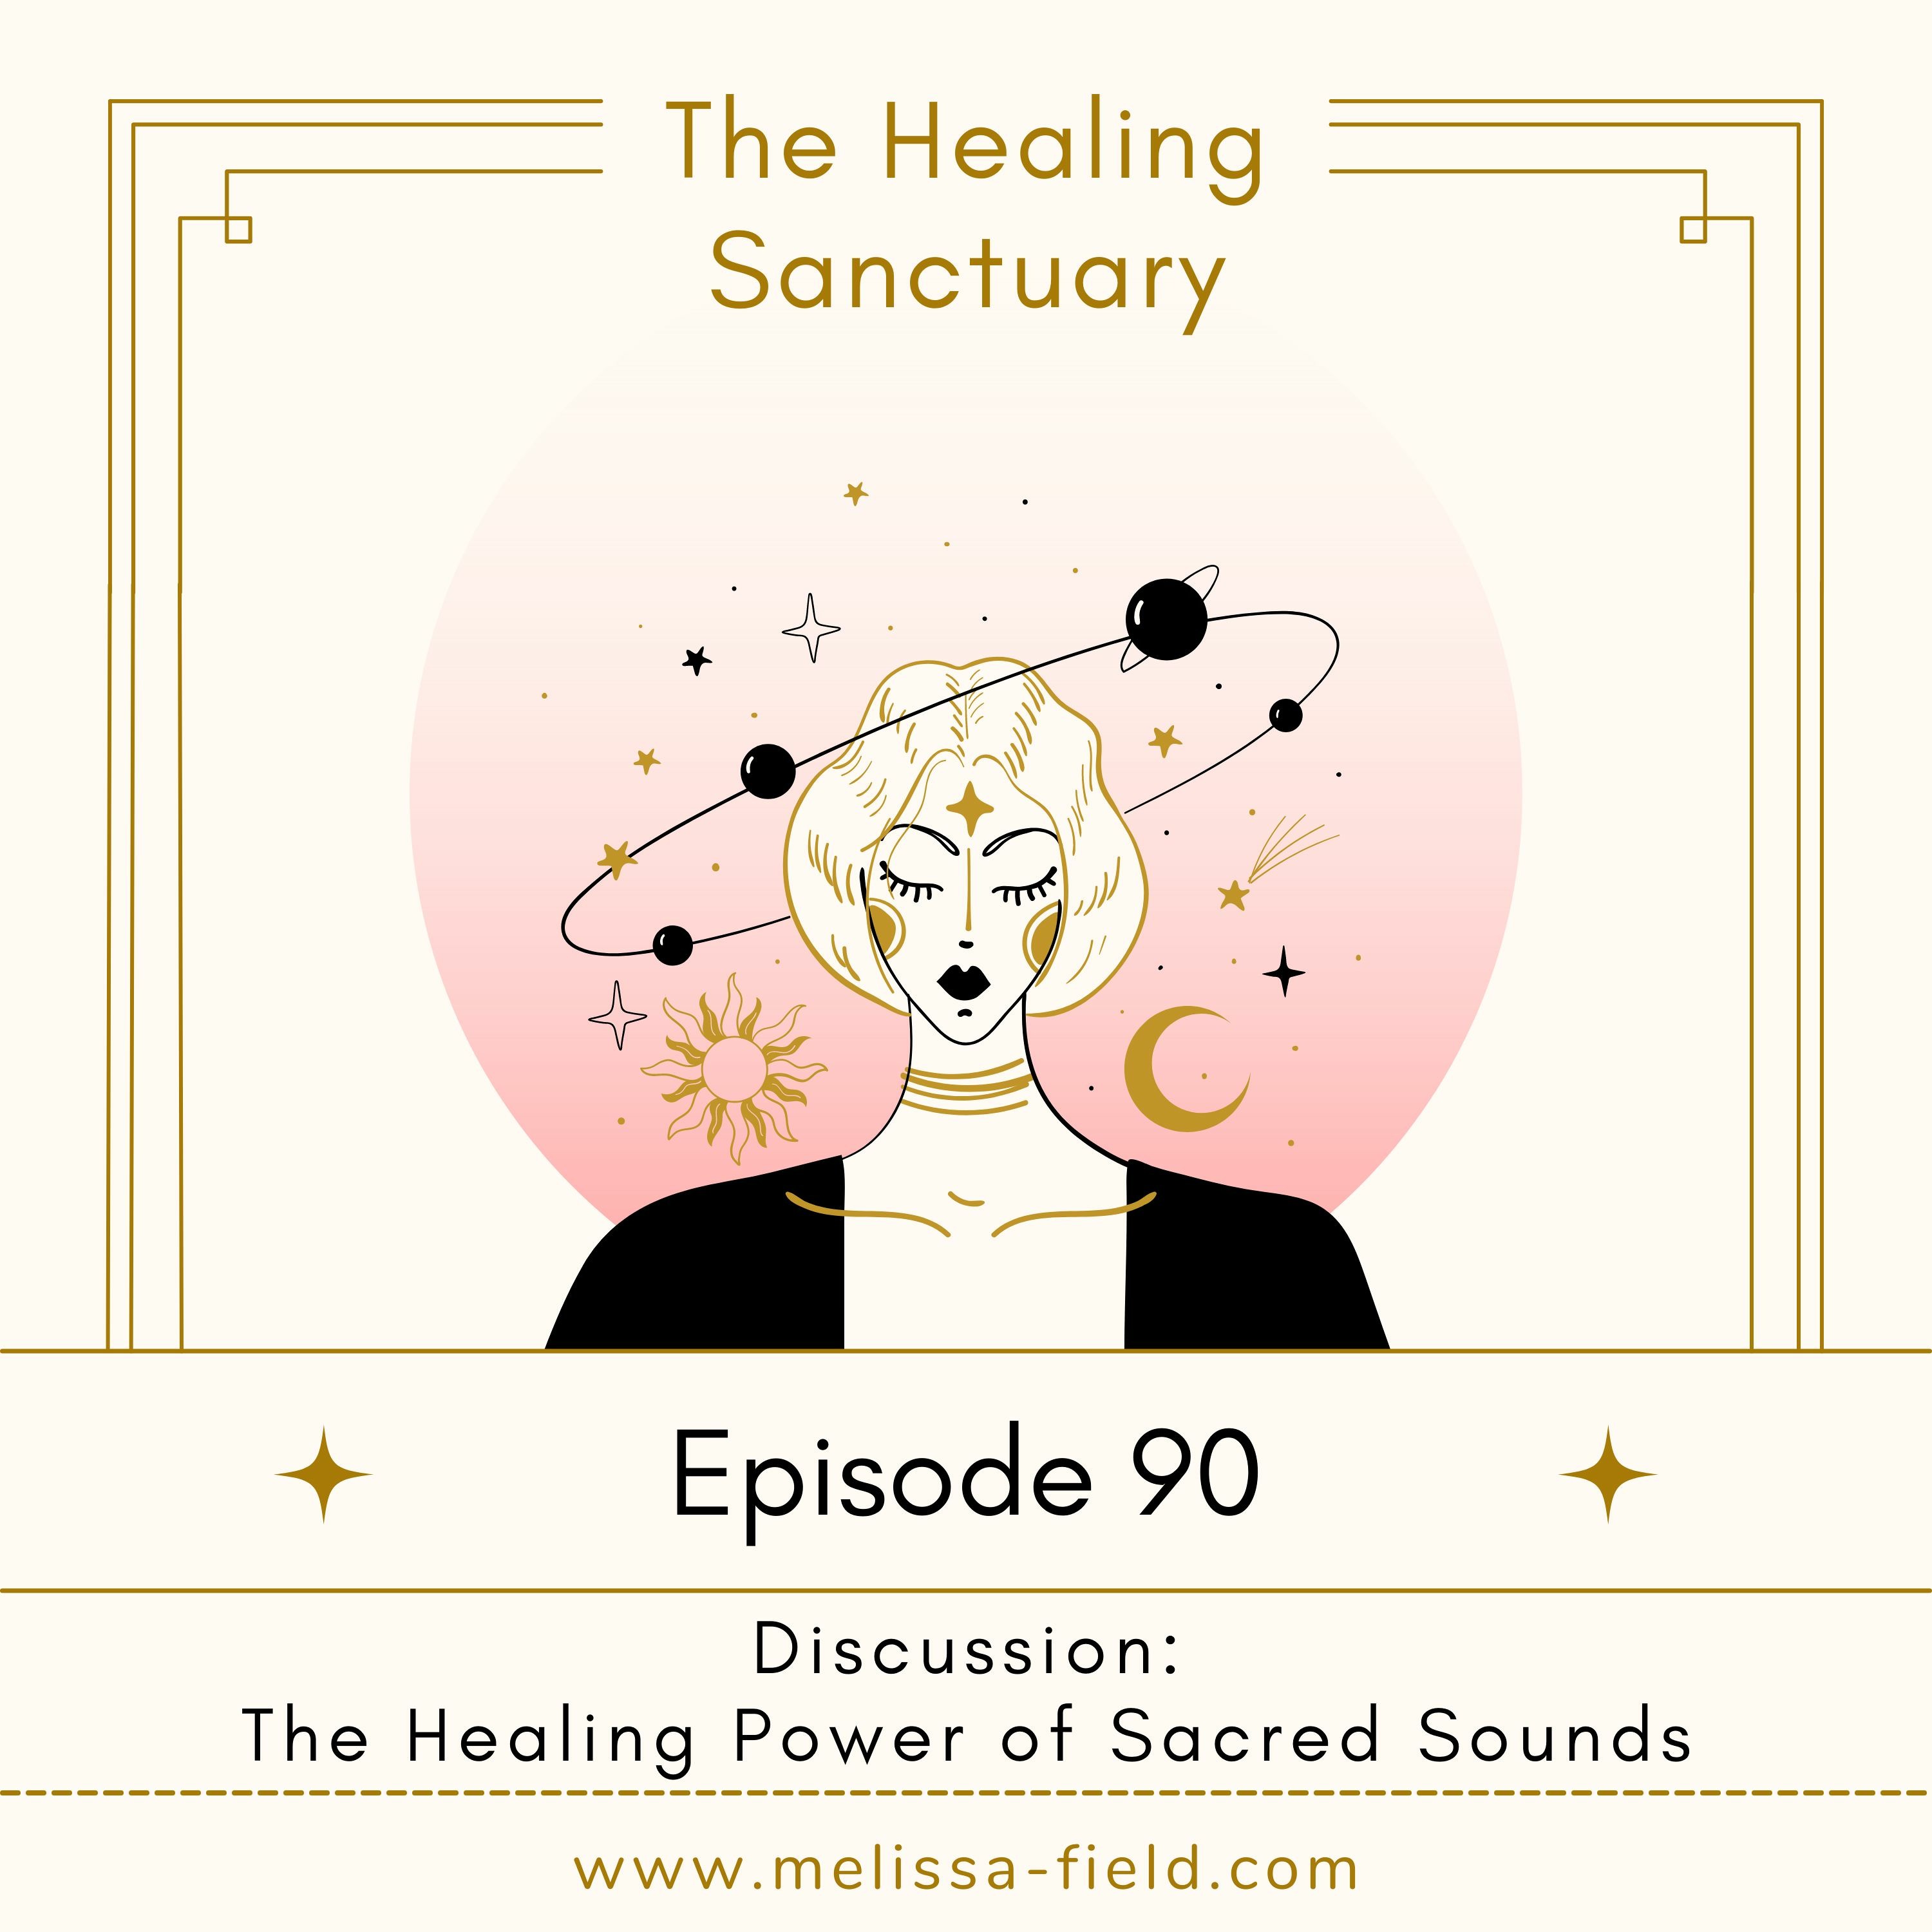 Discussion: The Healing Power of Sacred Sounds (OM, HU, & AH)